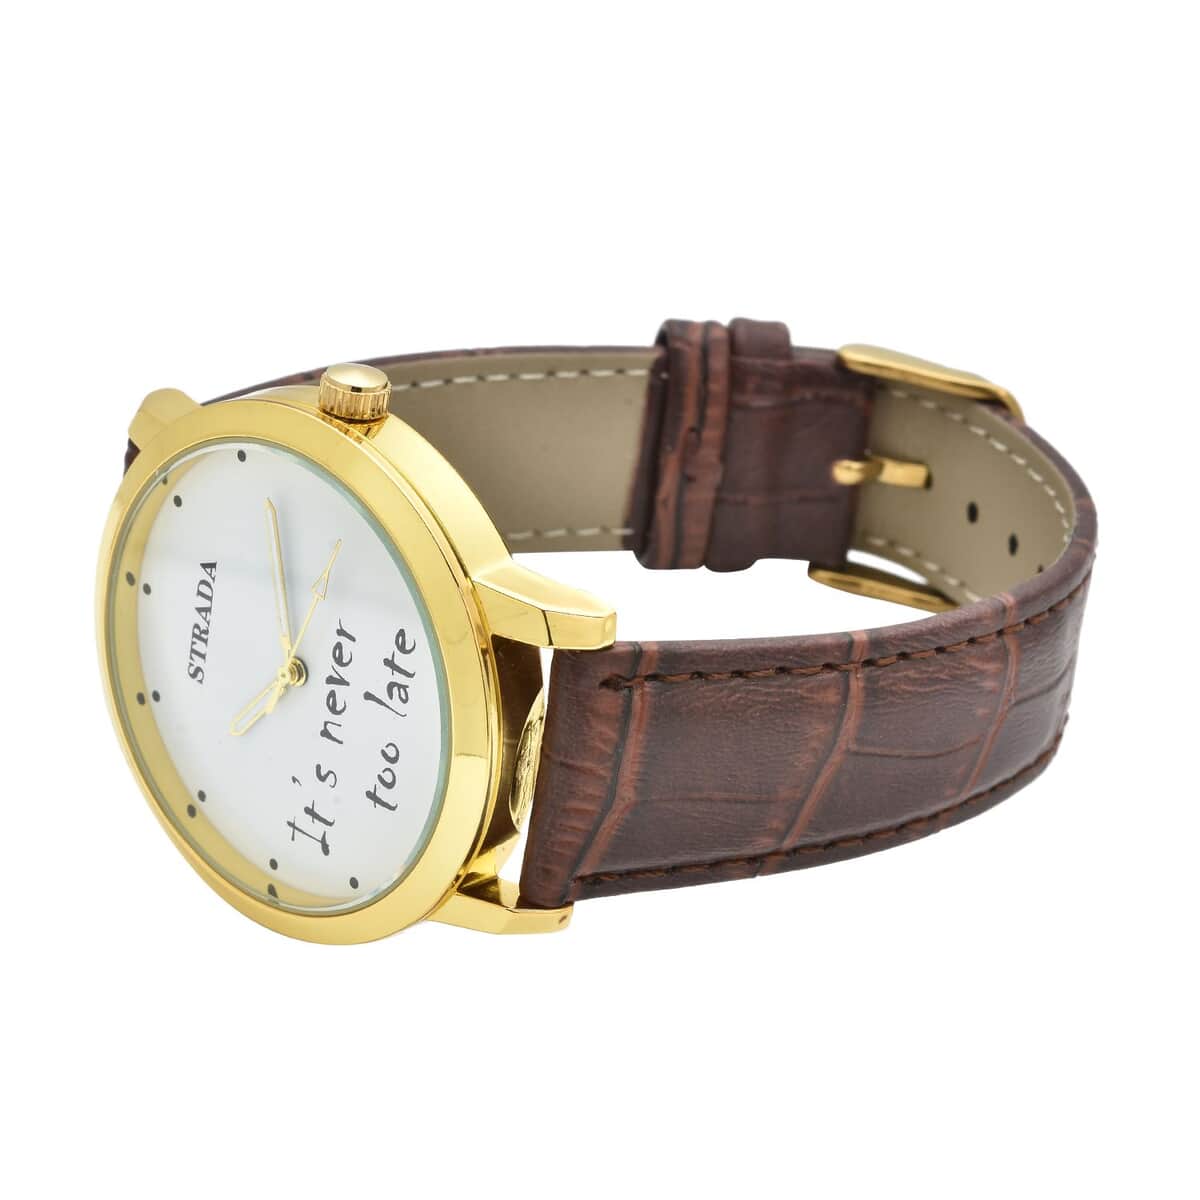 Strada Japanese Movement It's Never Too Late Dial Watch with Brown Faux Leather Strap (40.38mm) (7.5-9.0 Inch) image number 3